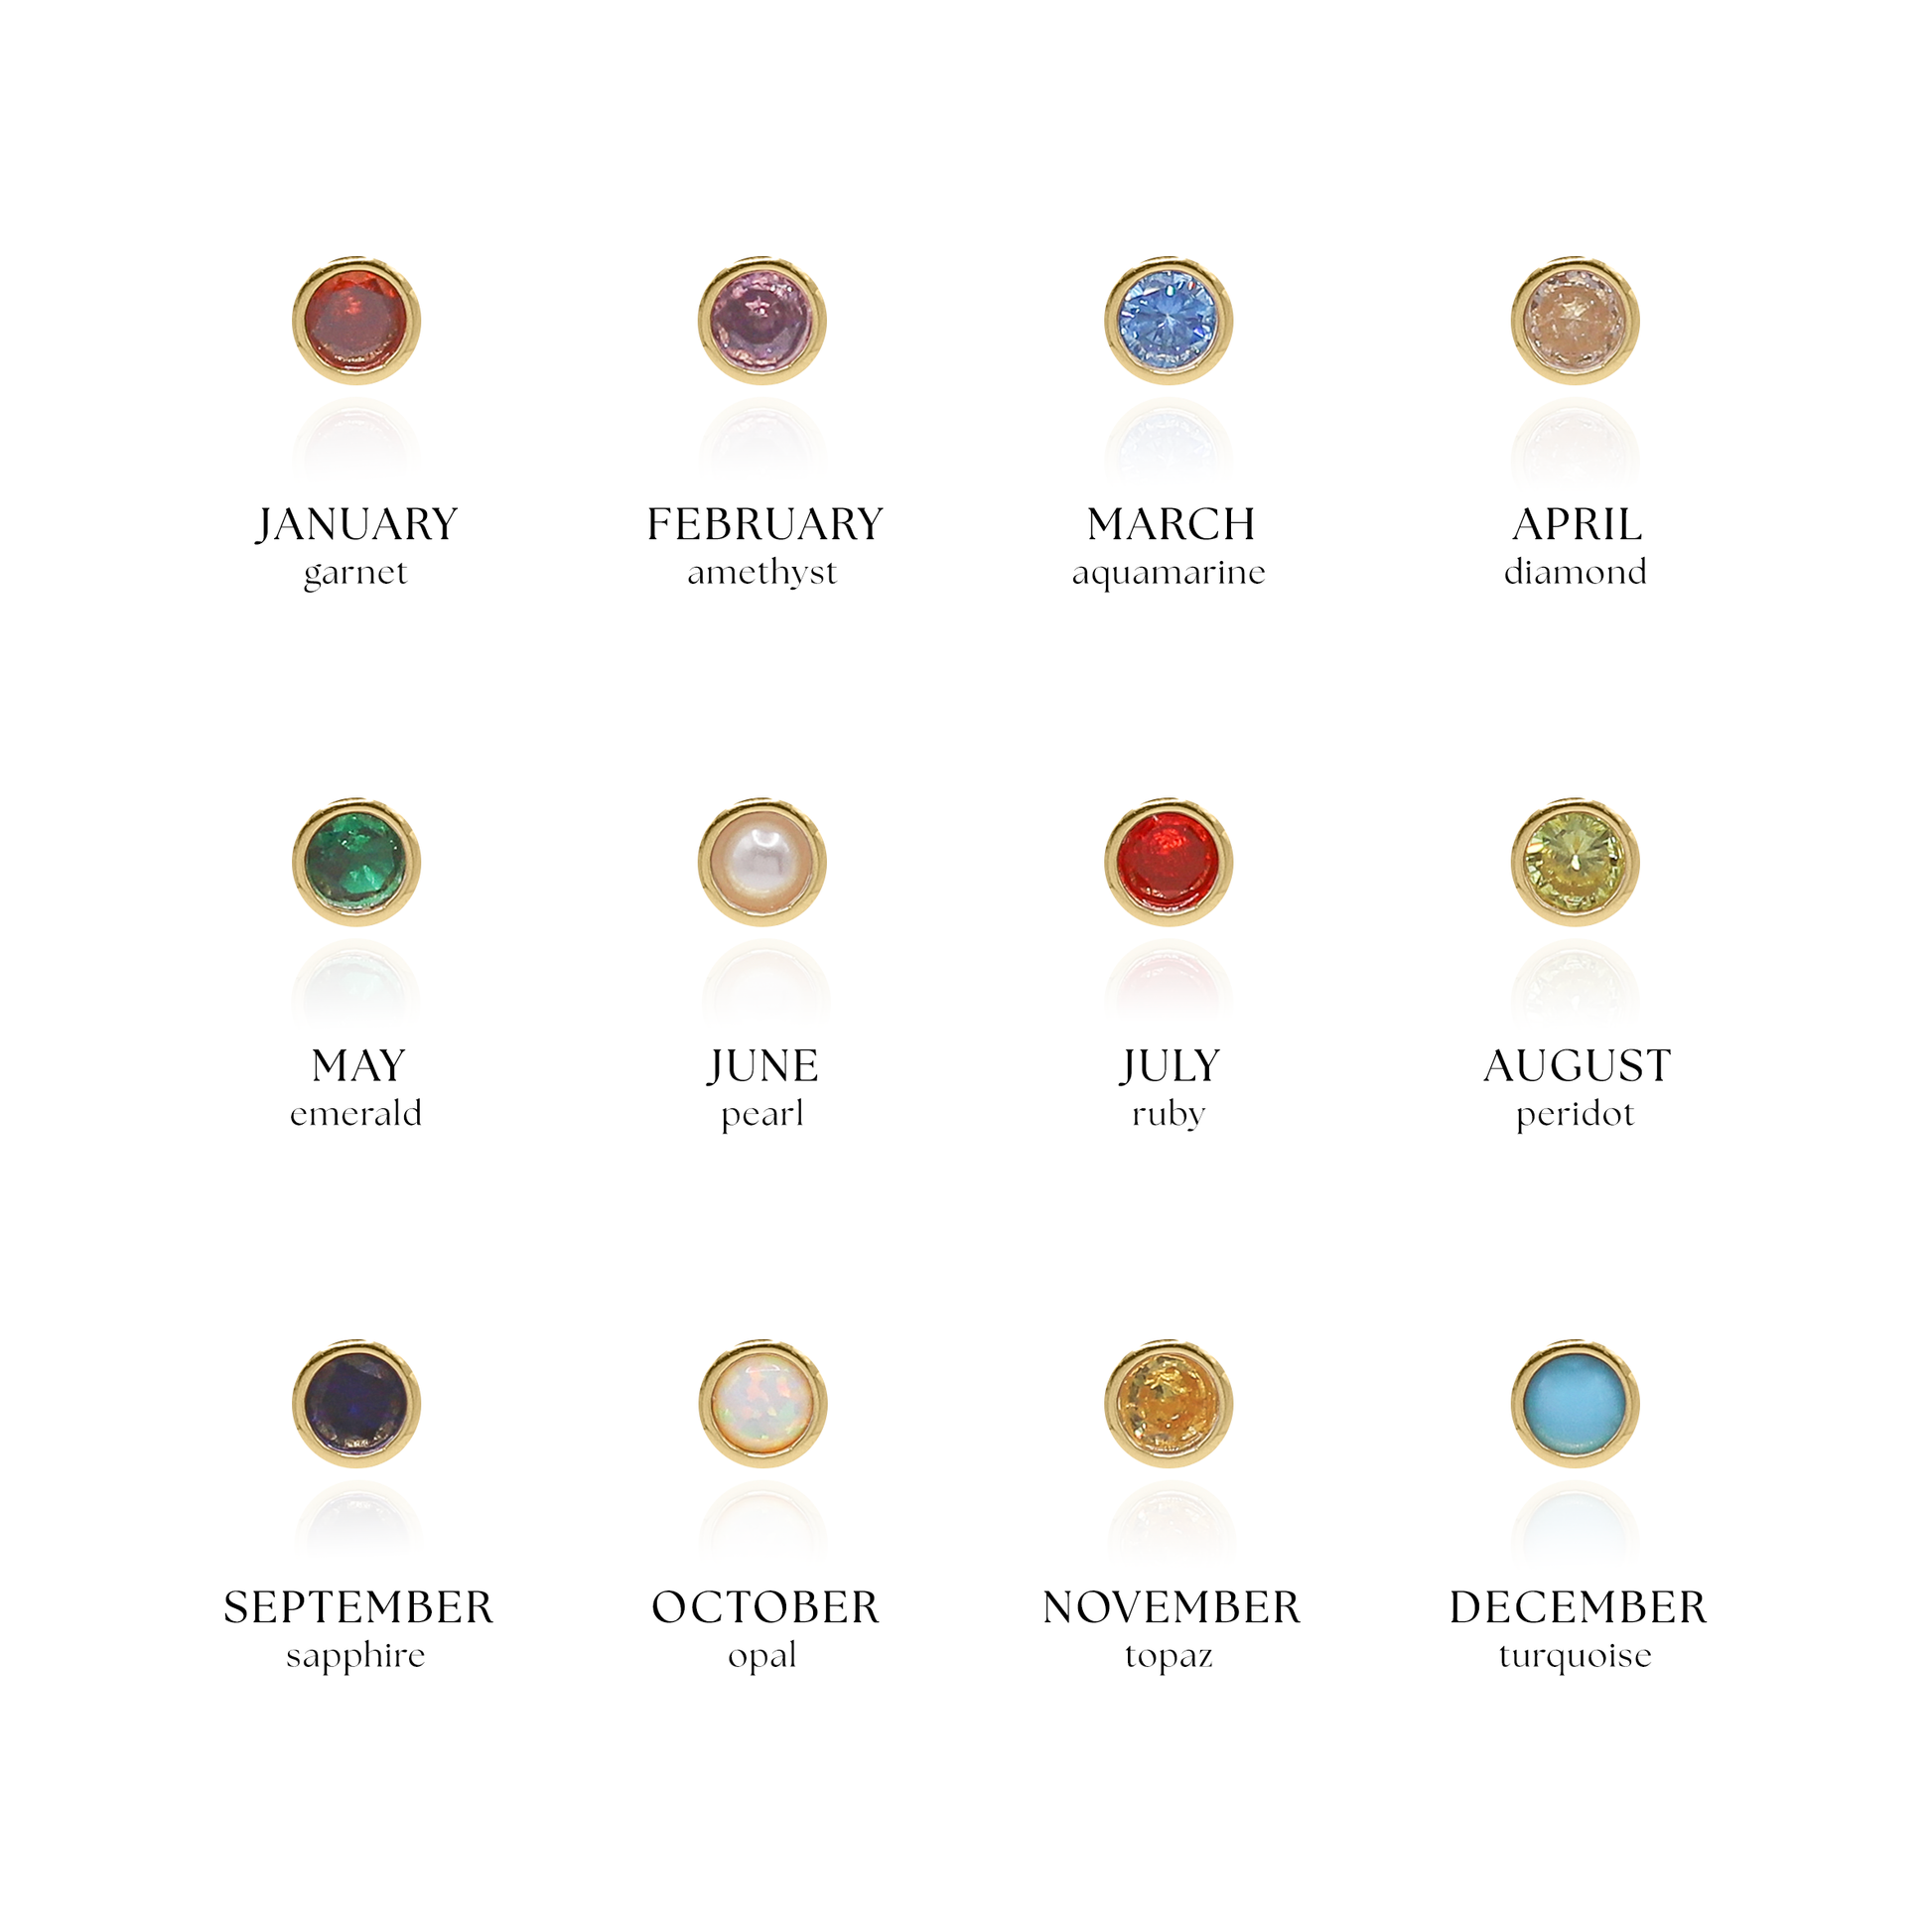 Star Birthstone Gift Set | Earrings & Necklace | 18K Gold Plated